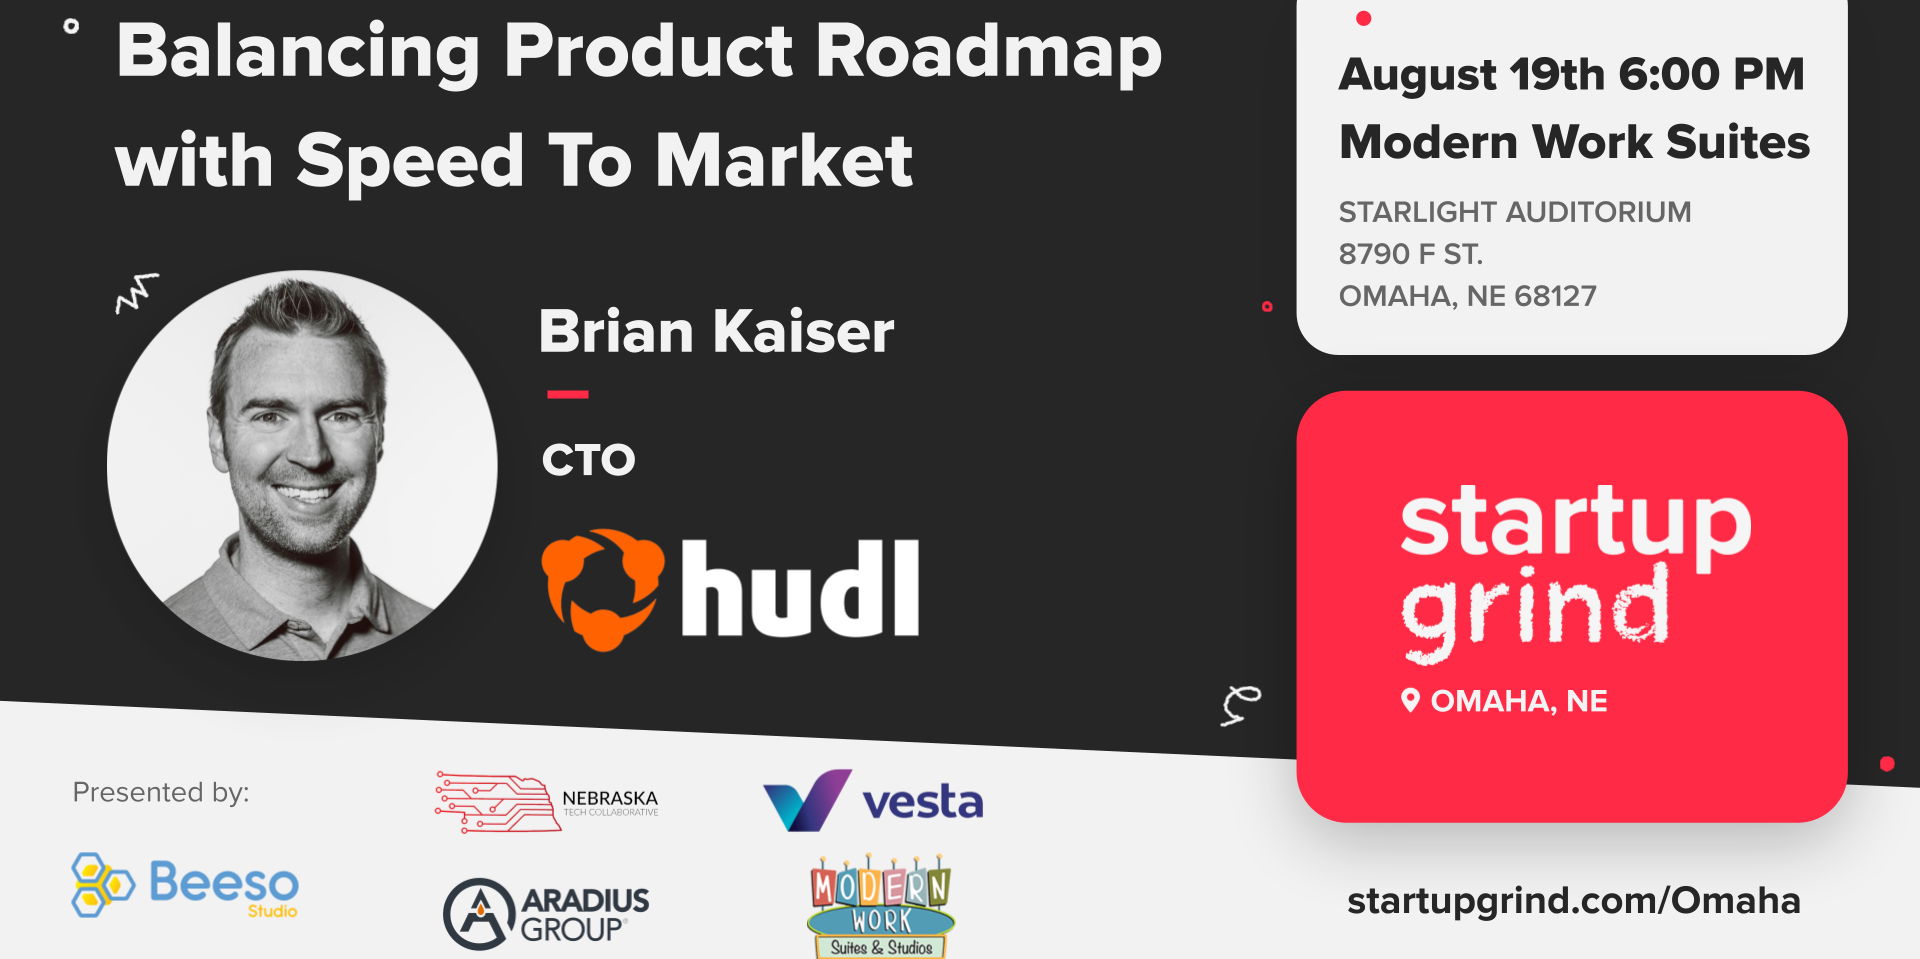 Balancing Product Roadmap with Speed To Market | Brian Kaiser, CTO of Hudl promotional image